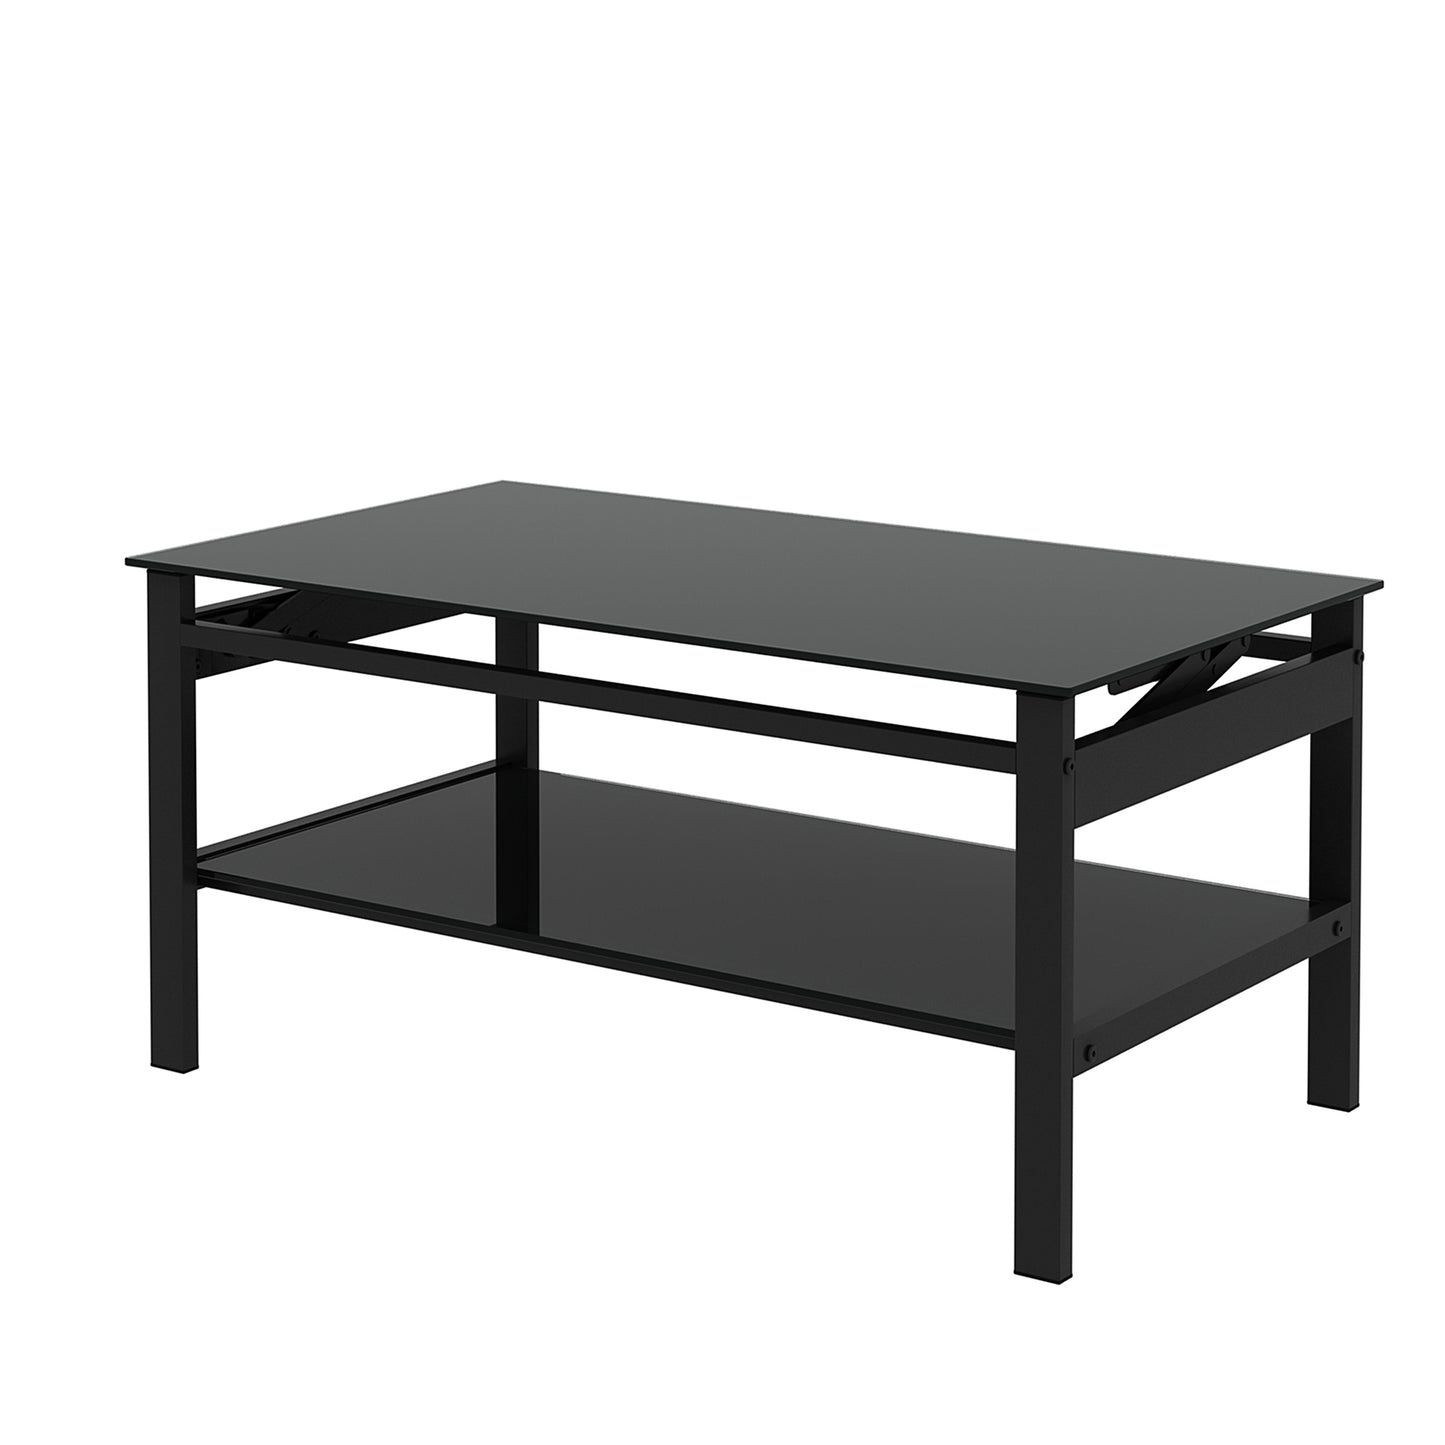 Glass Lift Top Coffee Table, Modern Simple 2-Layer Tempered Glass Coffee Table for Living Room, Black